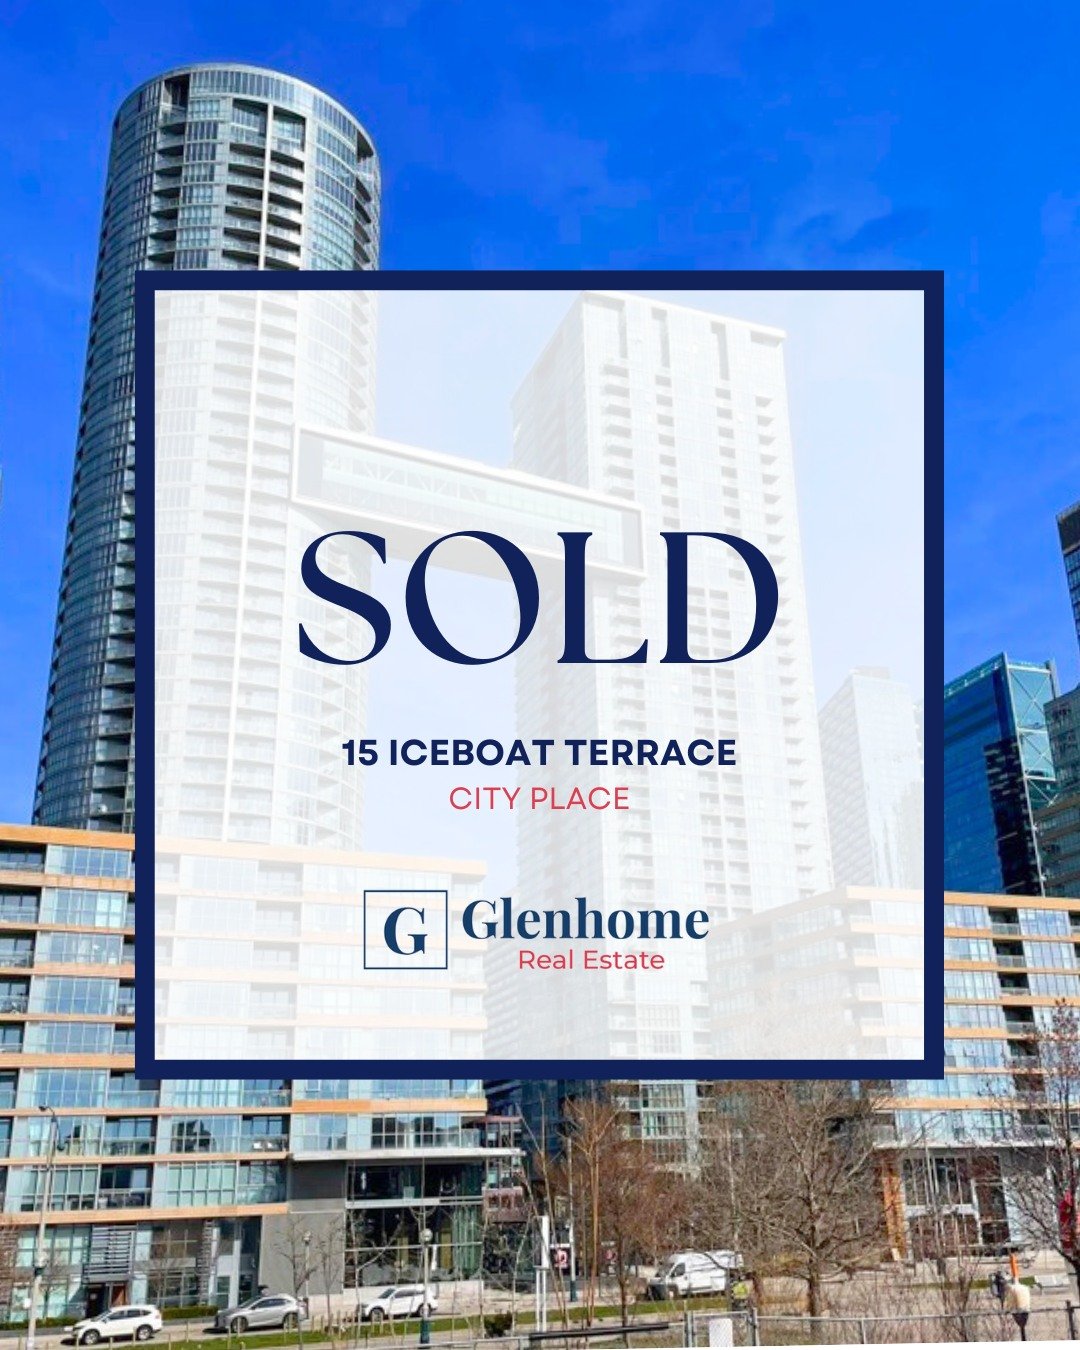 We're so excited for our clients on the purchase of their incredible new condo at 15 Iceboat Terrace!

15 Iceboat Terr | Suite 232
MLS: C8024108

Sold by:

JR Robert
Sales Representative
Royal LePage Terrequity
Glenhome Real Estate, Brokerage
JR@glen